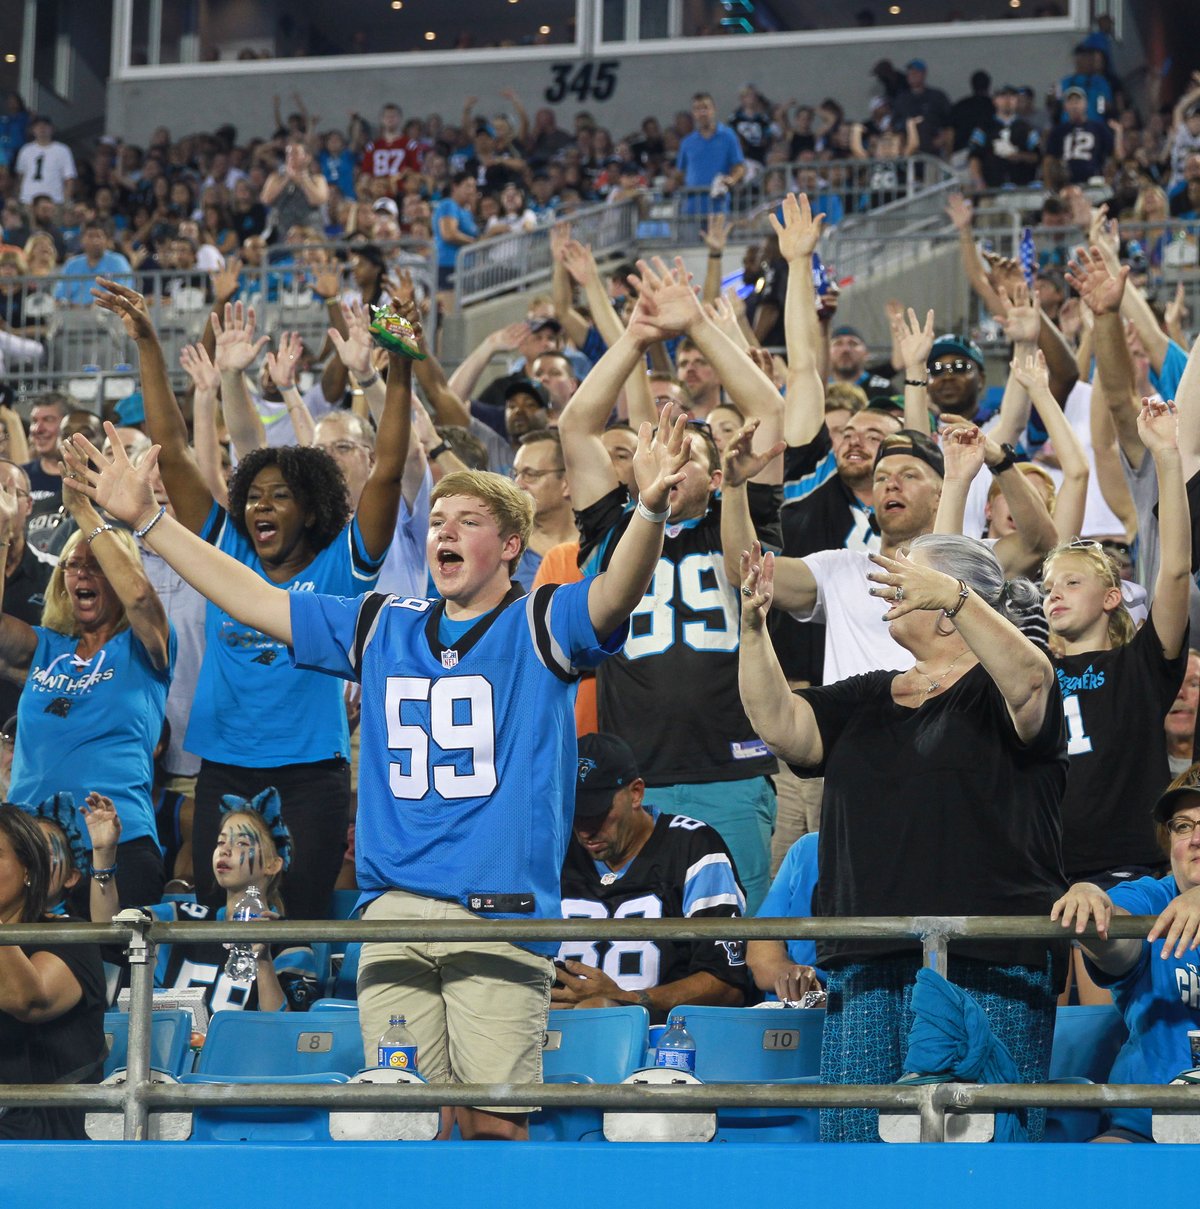 Carolina Panthers tickets are among the best deals in the NFL, new